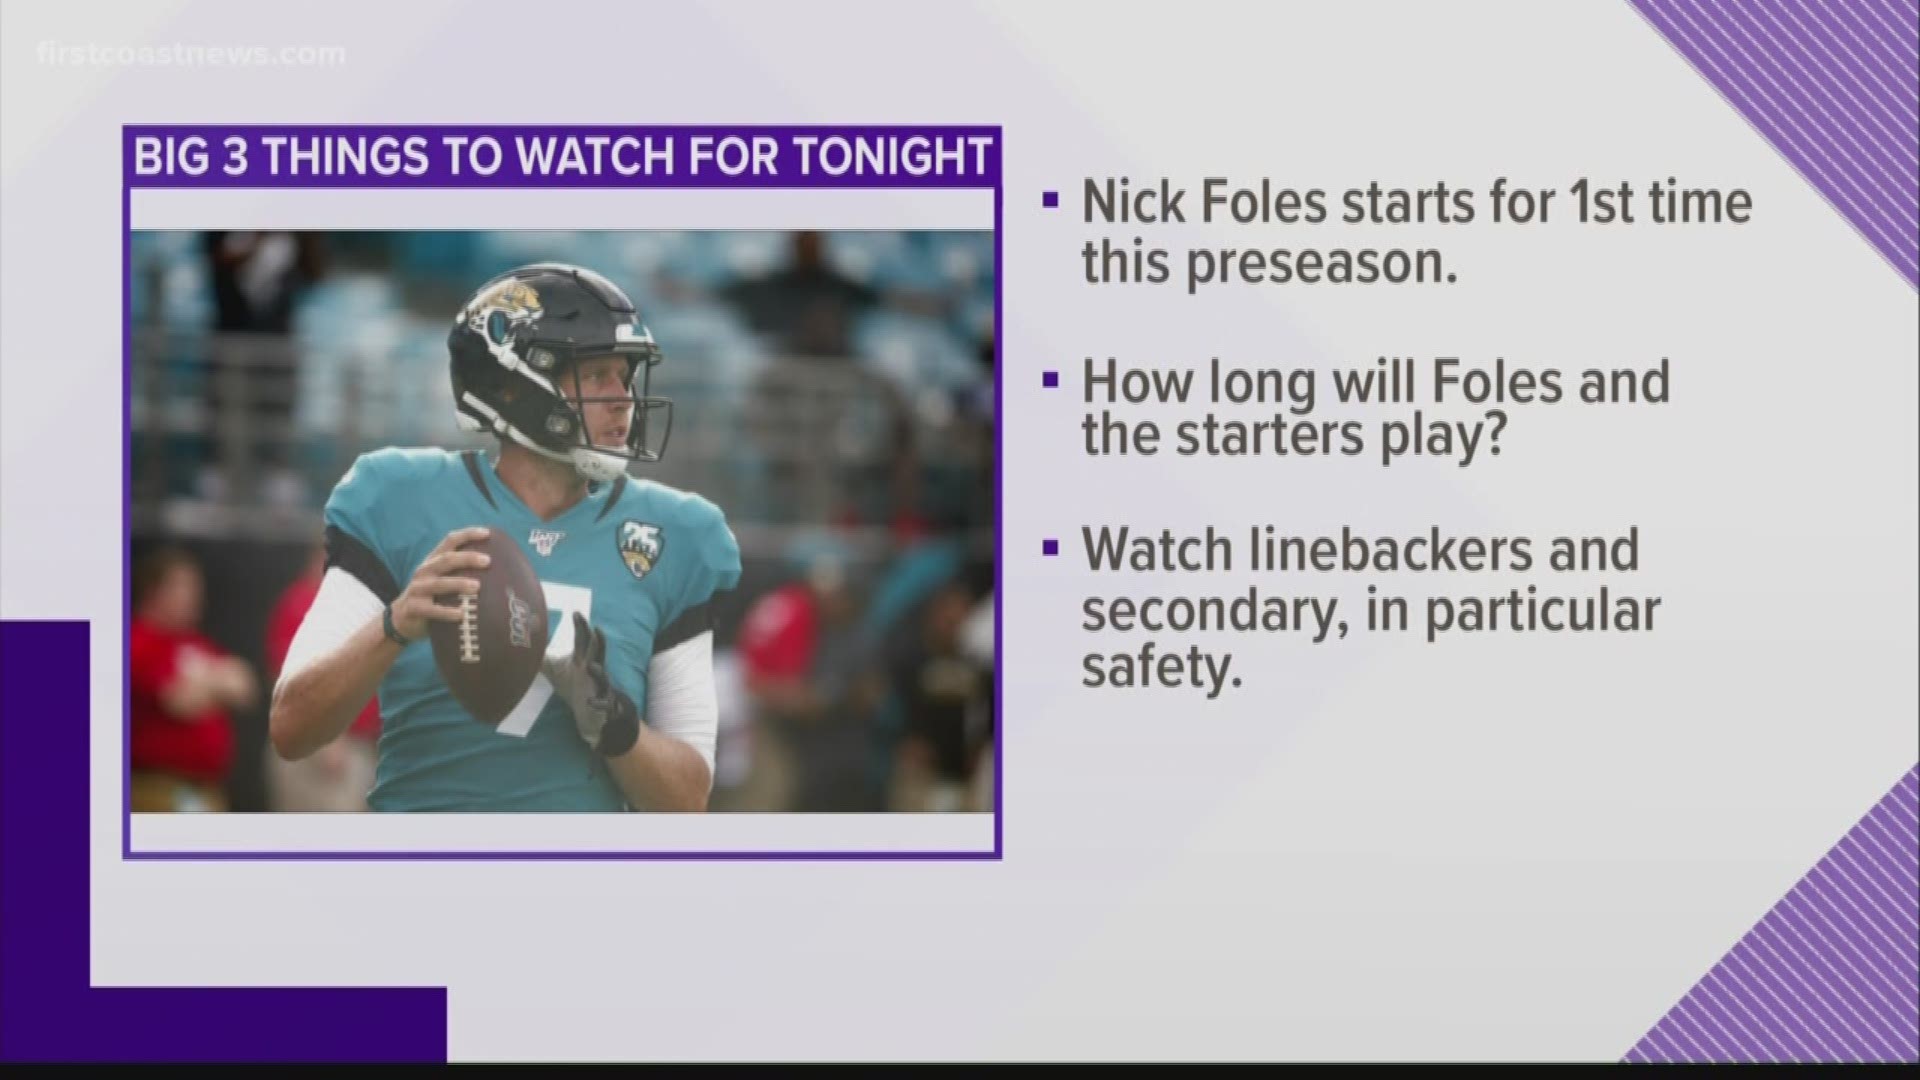 Big three things to watch out for include the performance by Nick Foles, how long he will play for and linebackers and secondary.